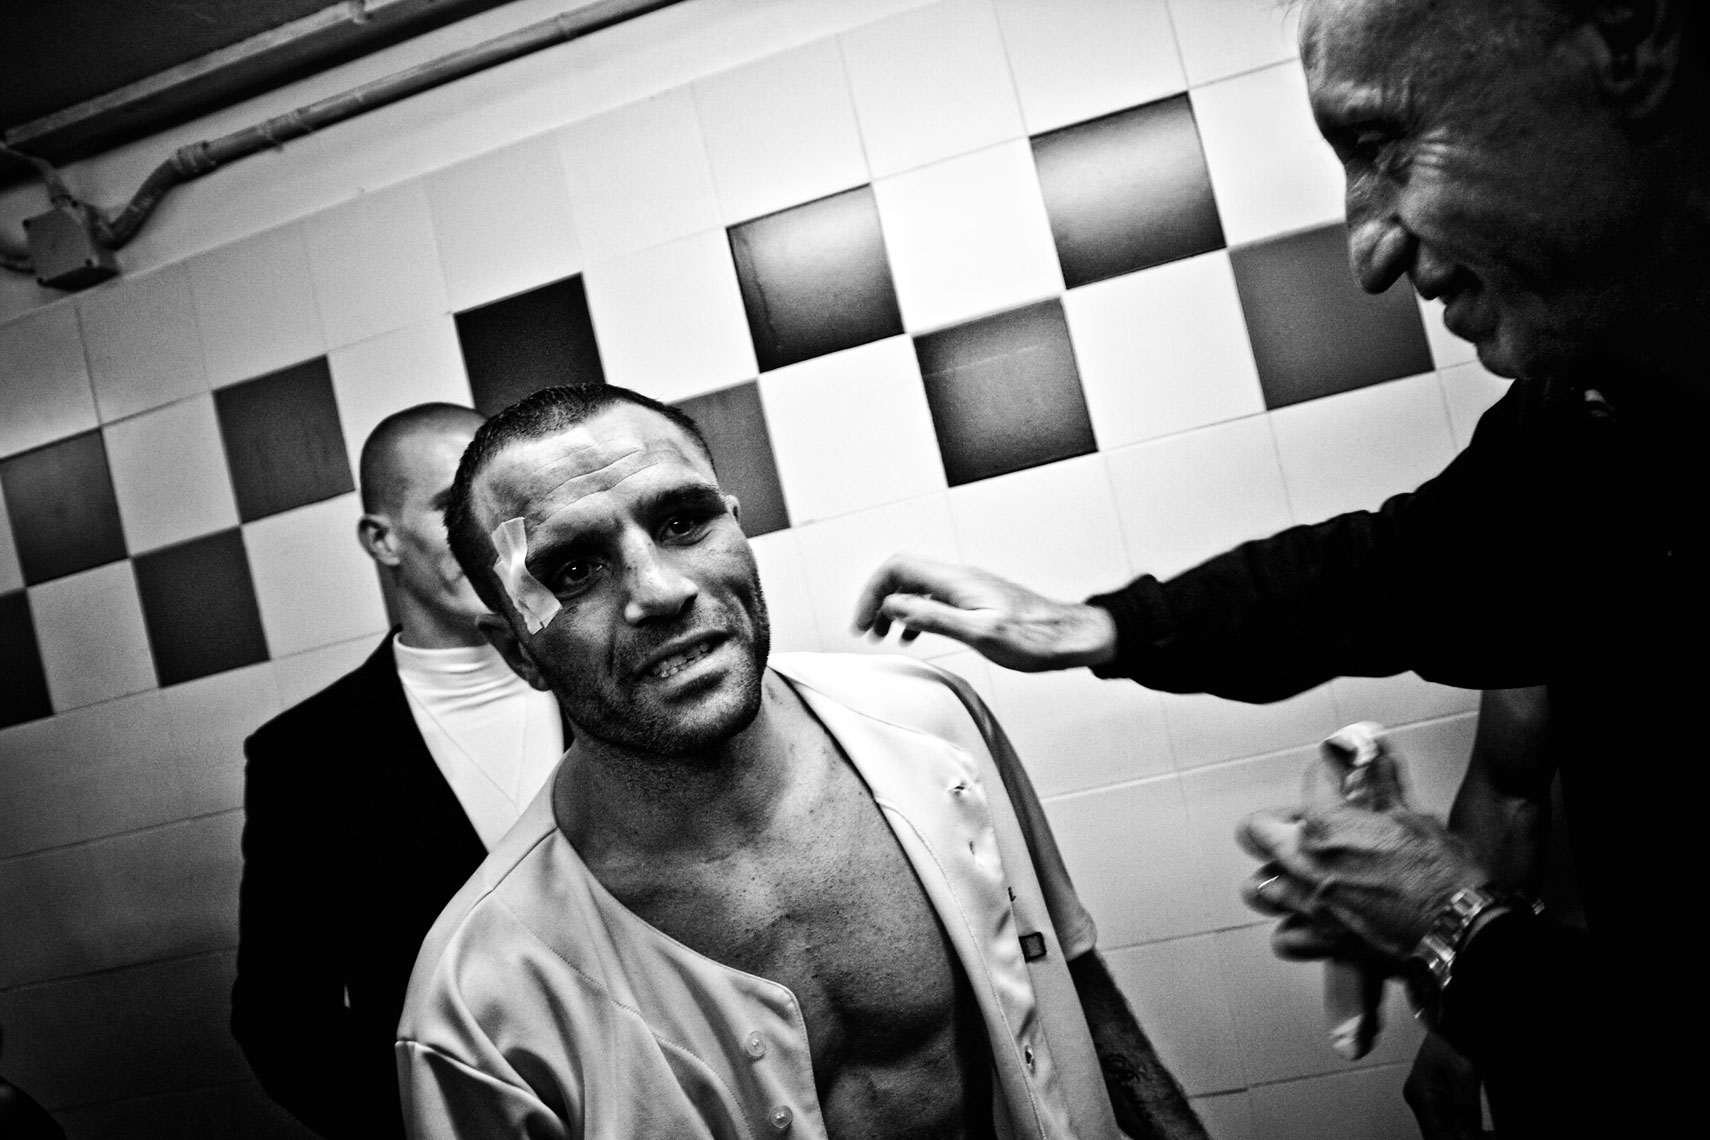 ITALY. Florence, 4th November 2011. Mandela Forum, the night of the match for the EBU (European Boxing Union) Welter Weight crown. Daniele Petrucci comes in the locker room to congratulate for Leonard Bundu's victory. Alessandro Boncinelli, Leonard's master and trainer, welcomes him.